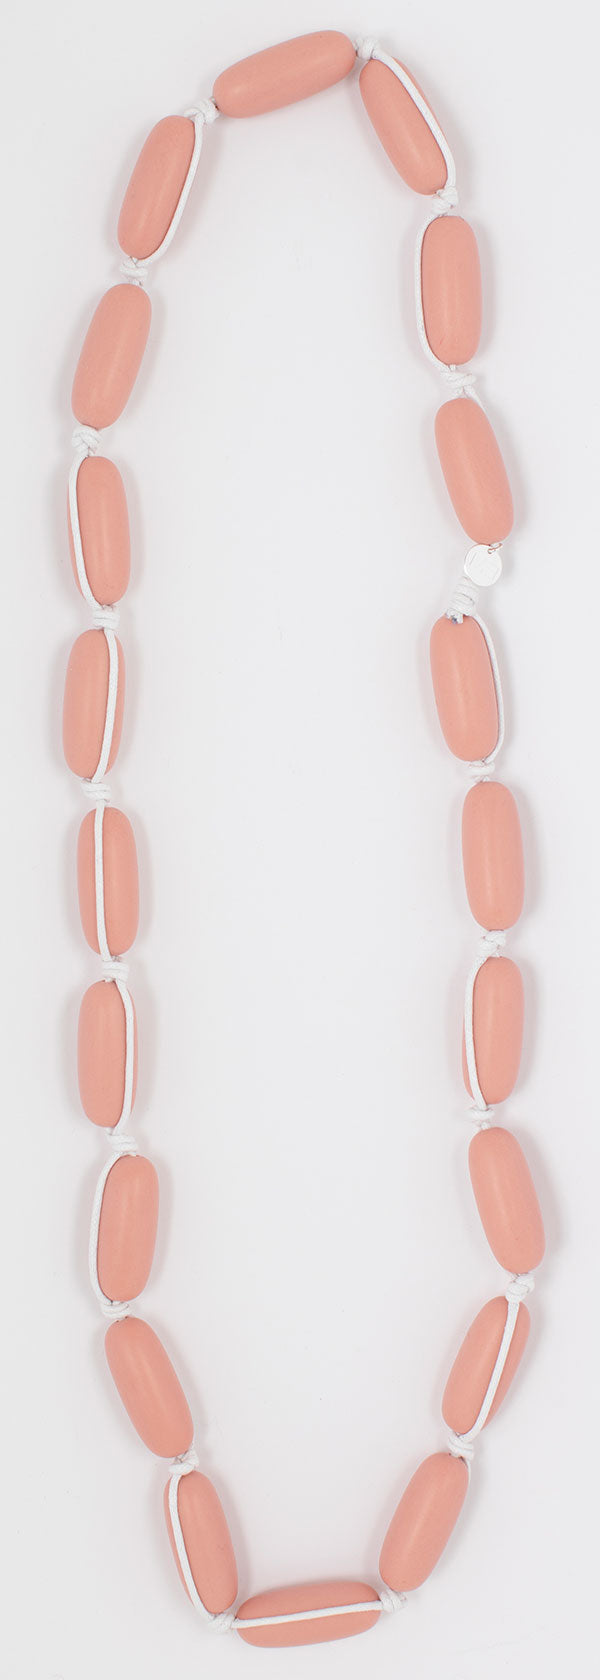 Evie Marques Endless Summer necklace Sunset on white cord